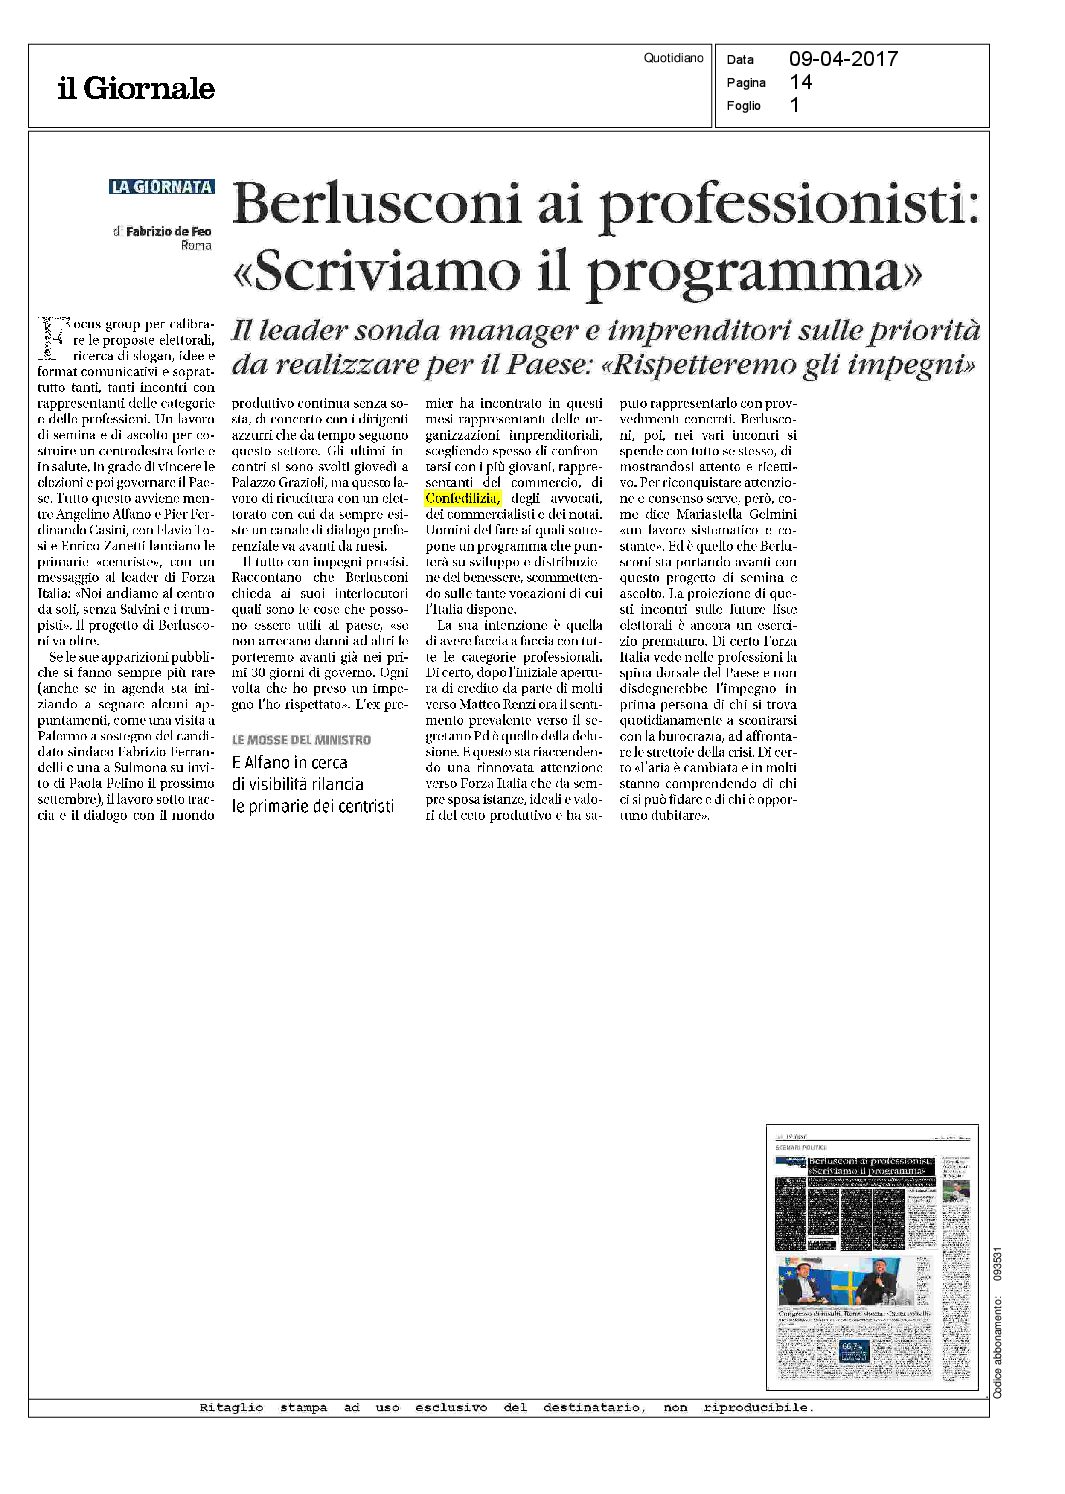 Giornale_9.4.17